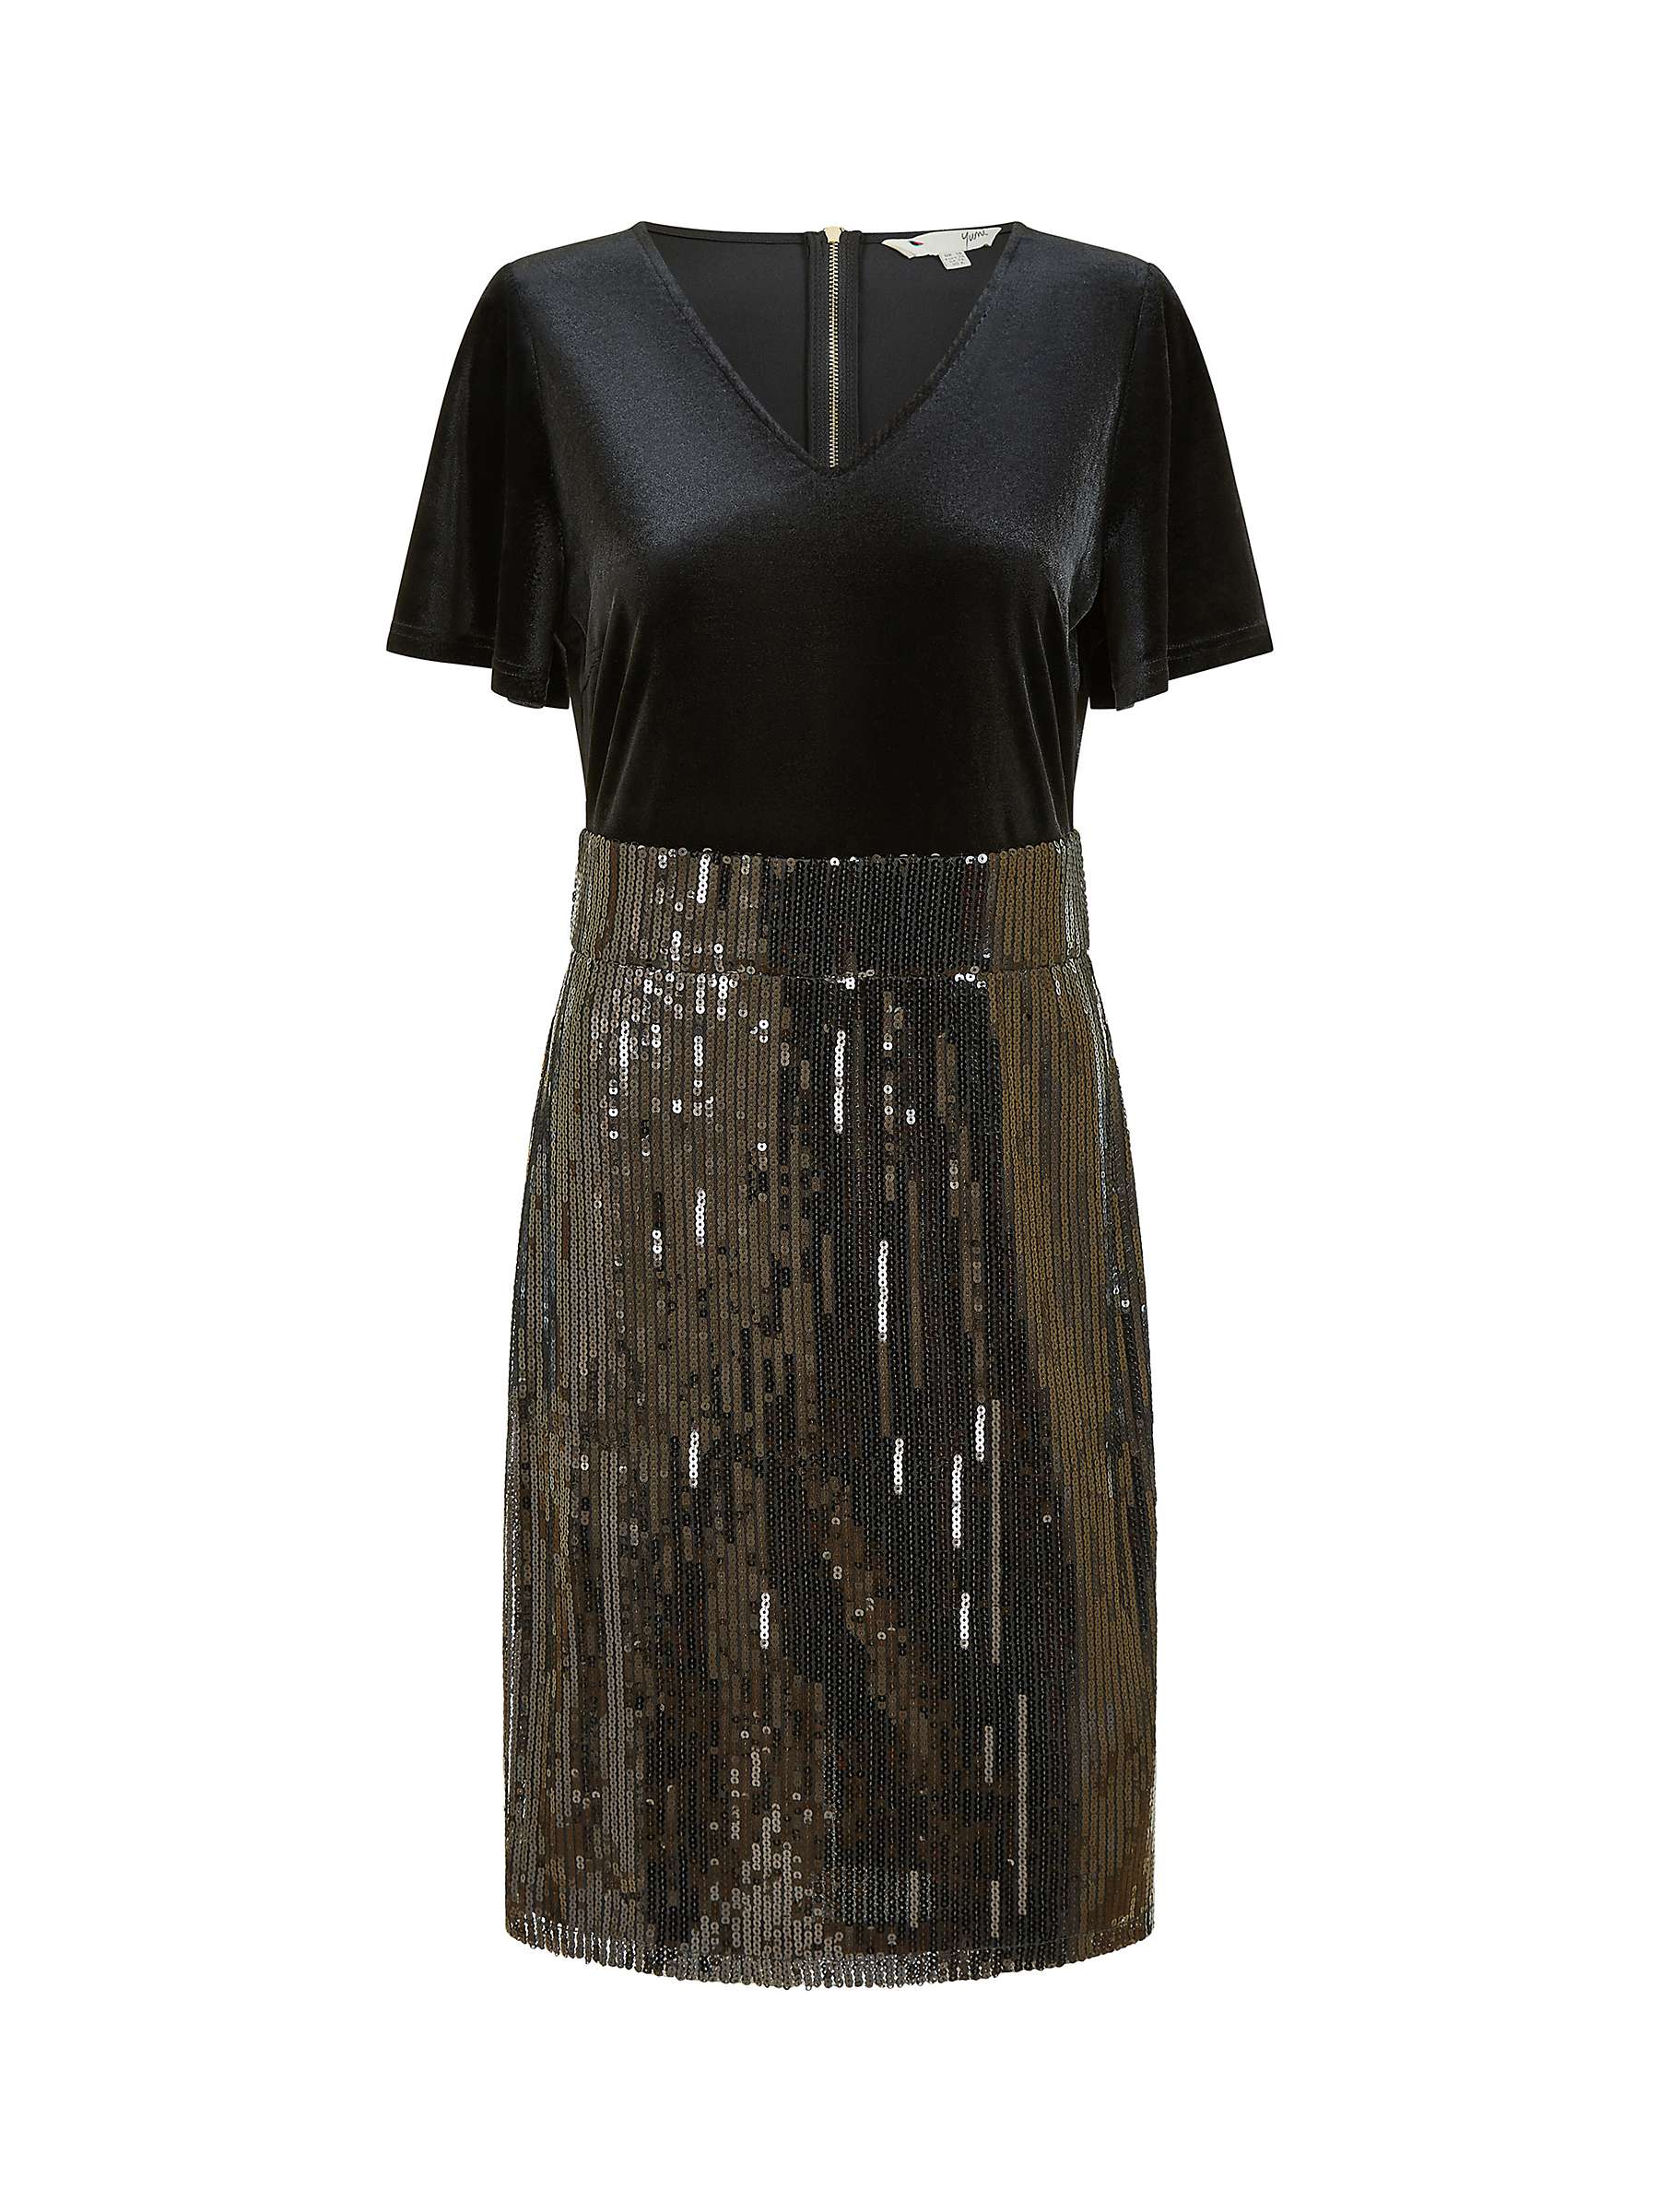 Buy Yumi Velvet And Sequin Fitted Dress, Black Online at johnlewis.com